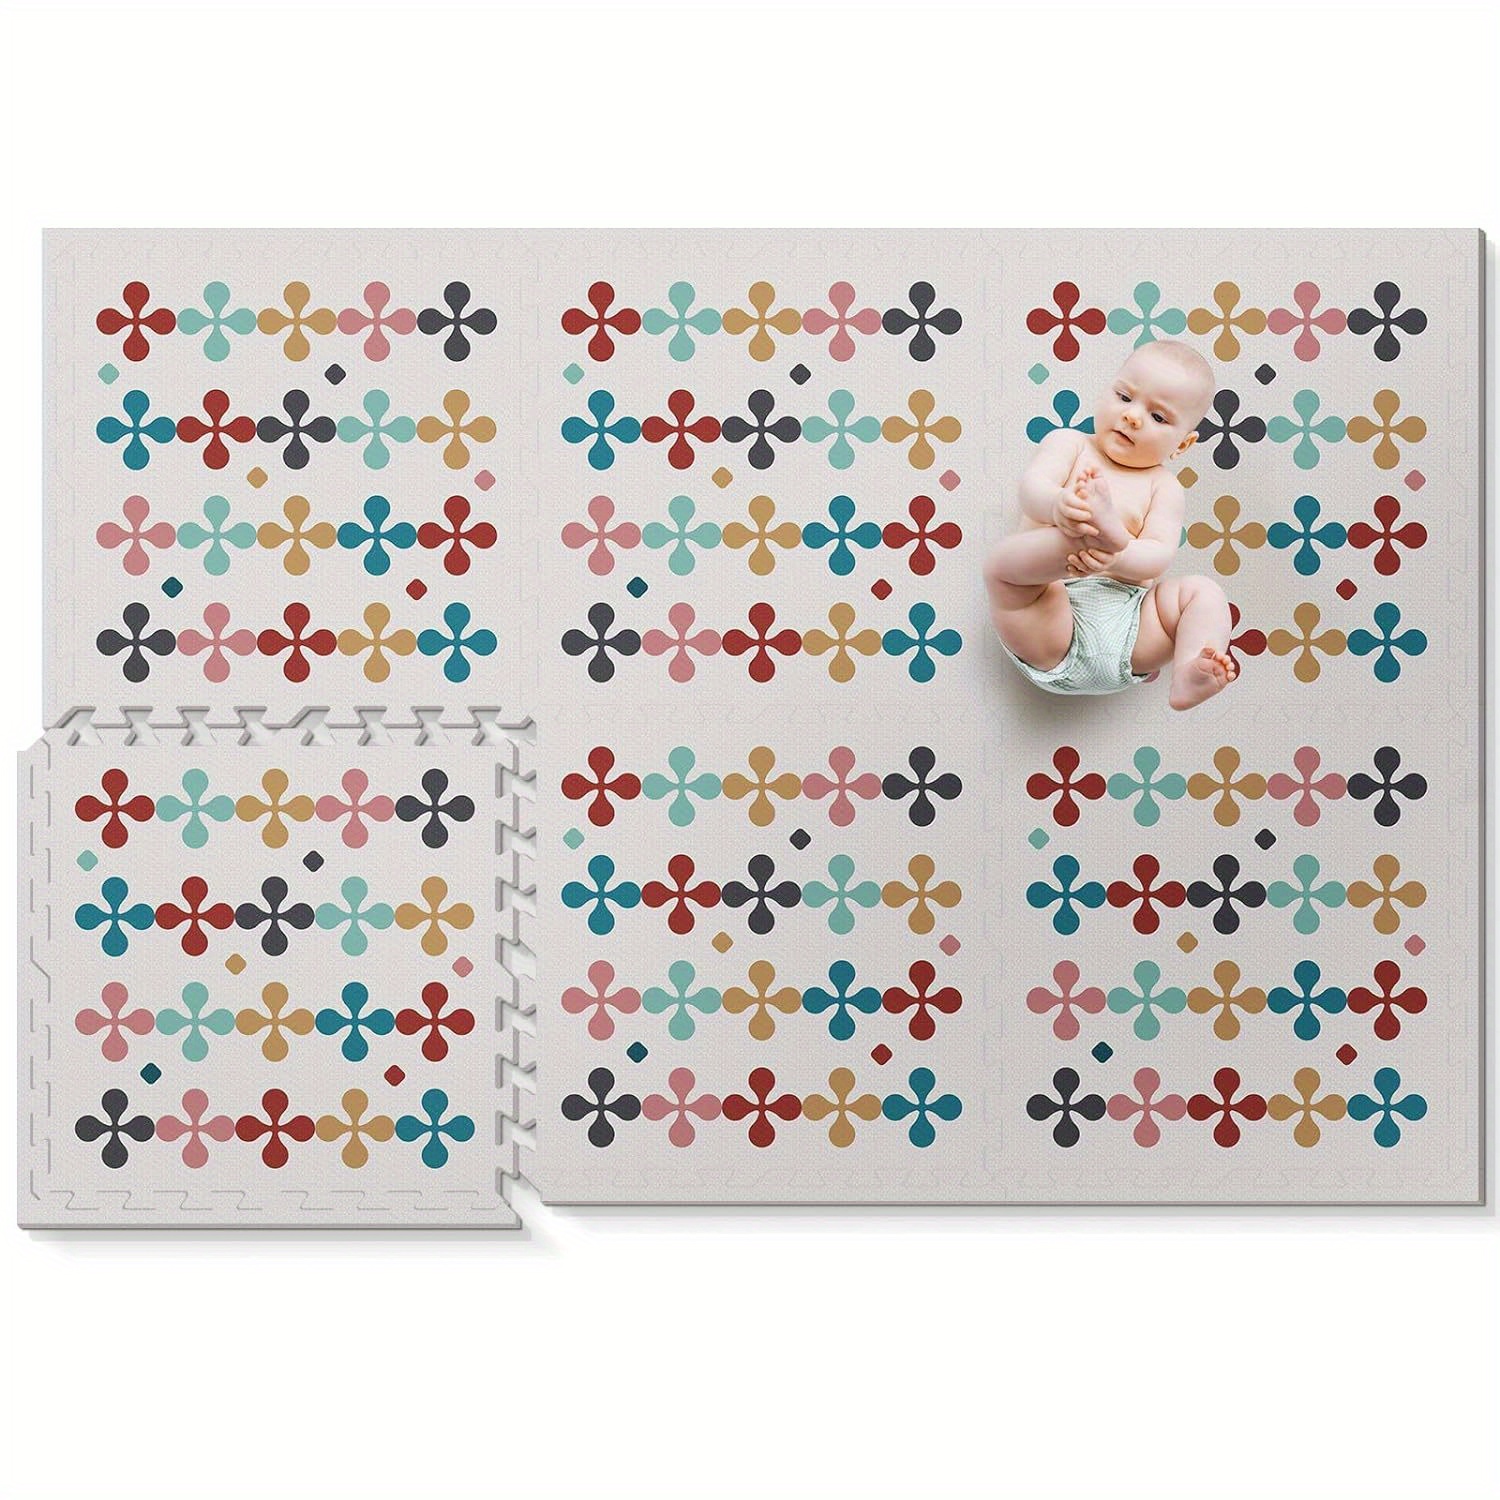 

Baby Play Mat - Foam Floor Tiles Interlocking Foam Play Mat 72x48 Inches Soft Non Toxic Puzzle Mat For Infants And Toddlers Tummy Time Mat Crawling Mat ()